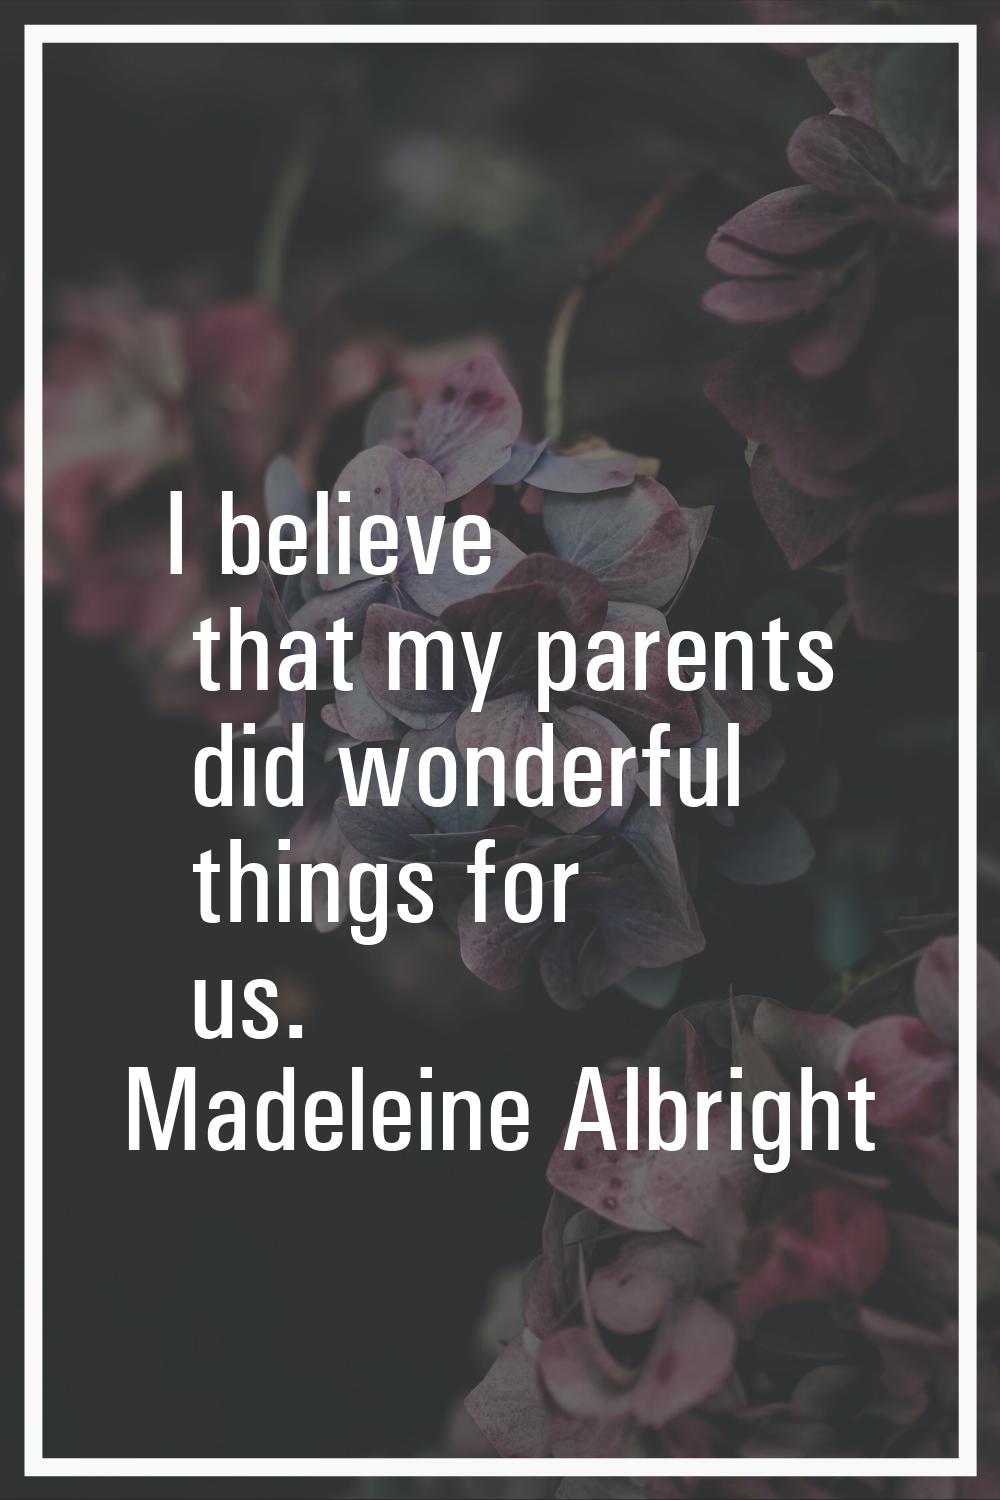 I believe that my parents did wonderful things for us.